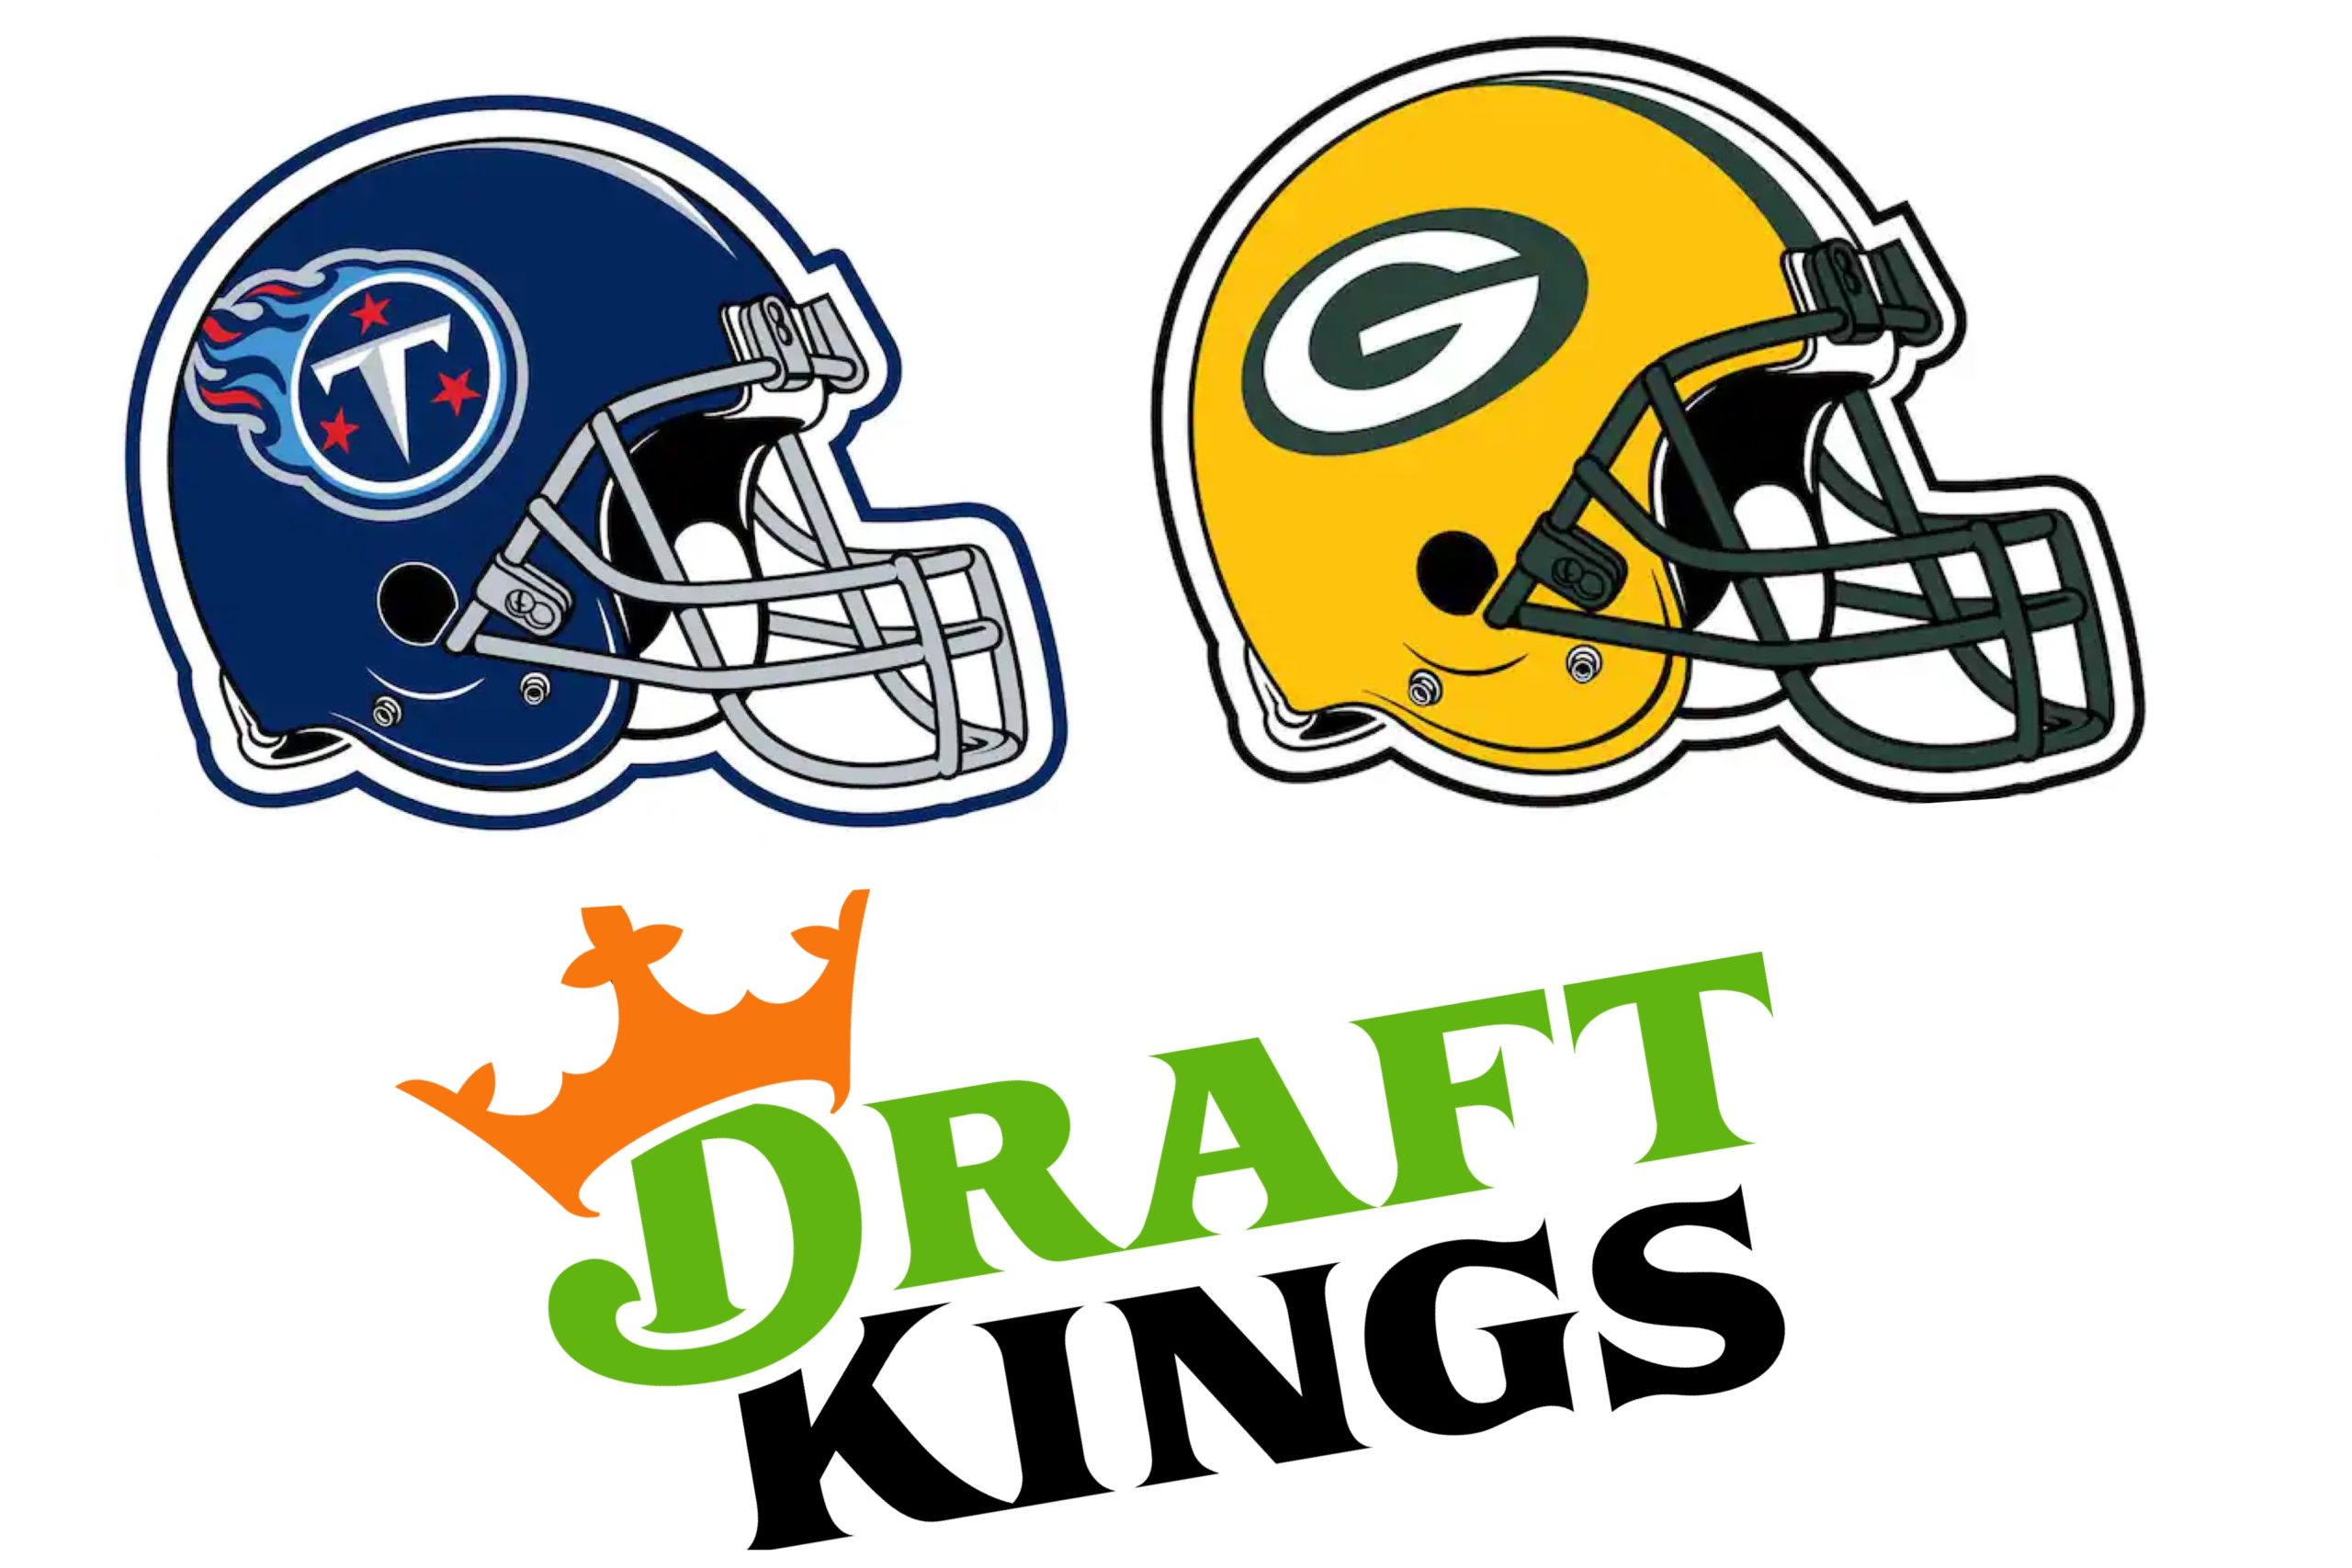 Thursday Night Football in Green Bay with DraftKings